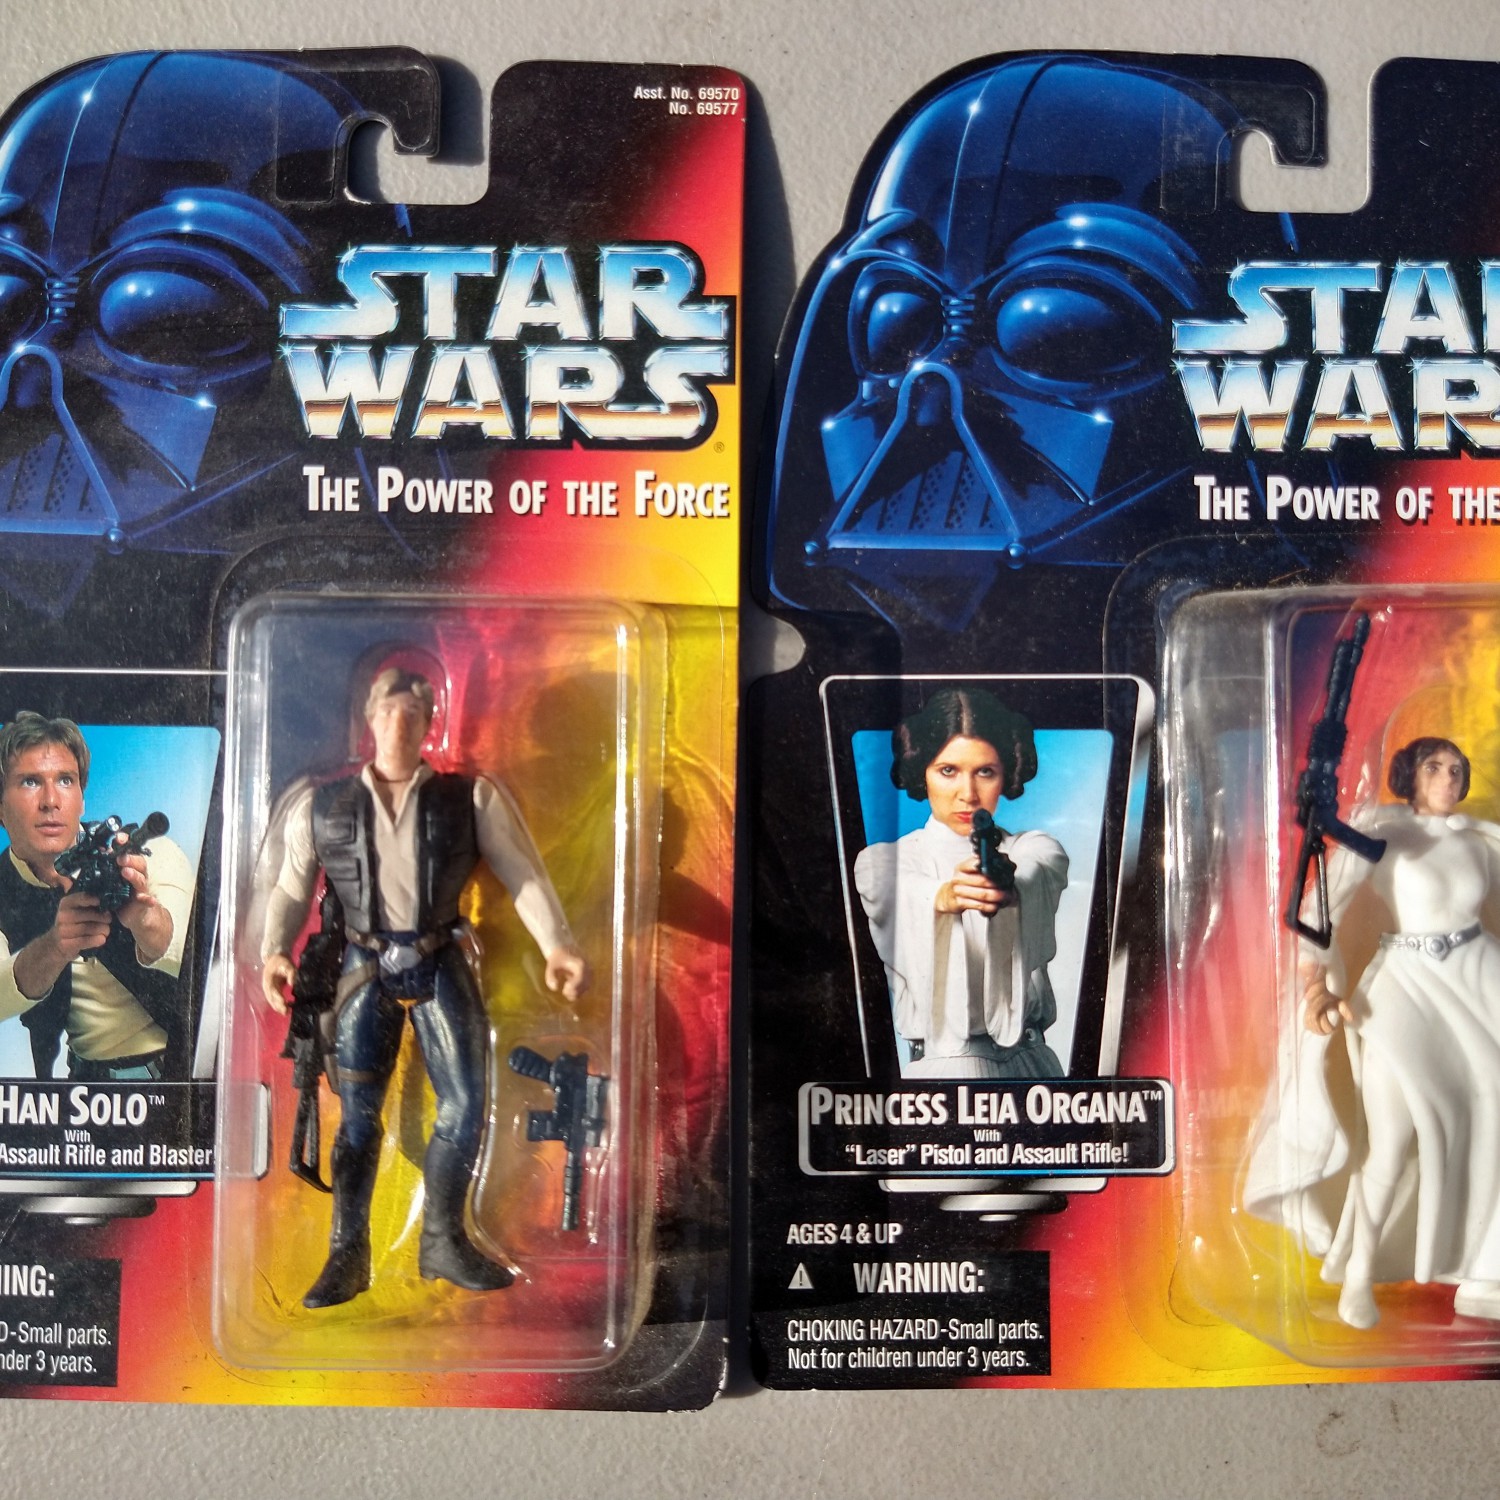 Star Wars Kenner The Power of the force